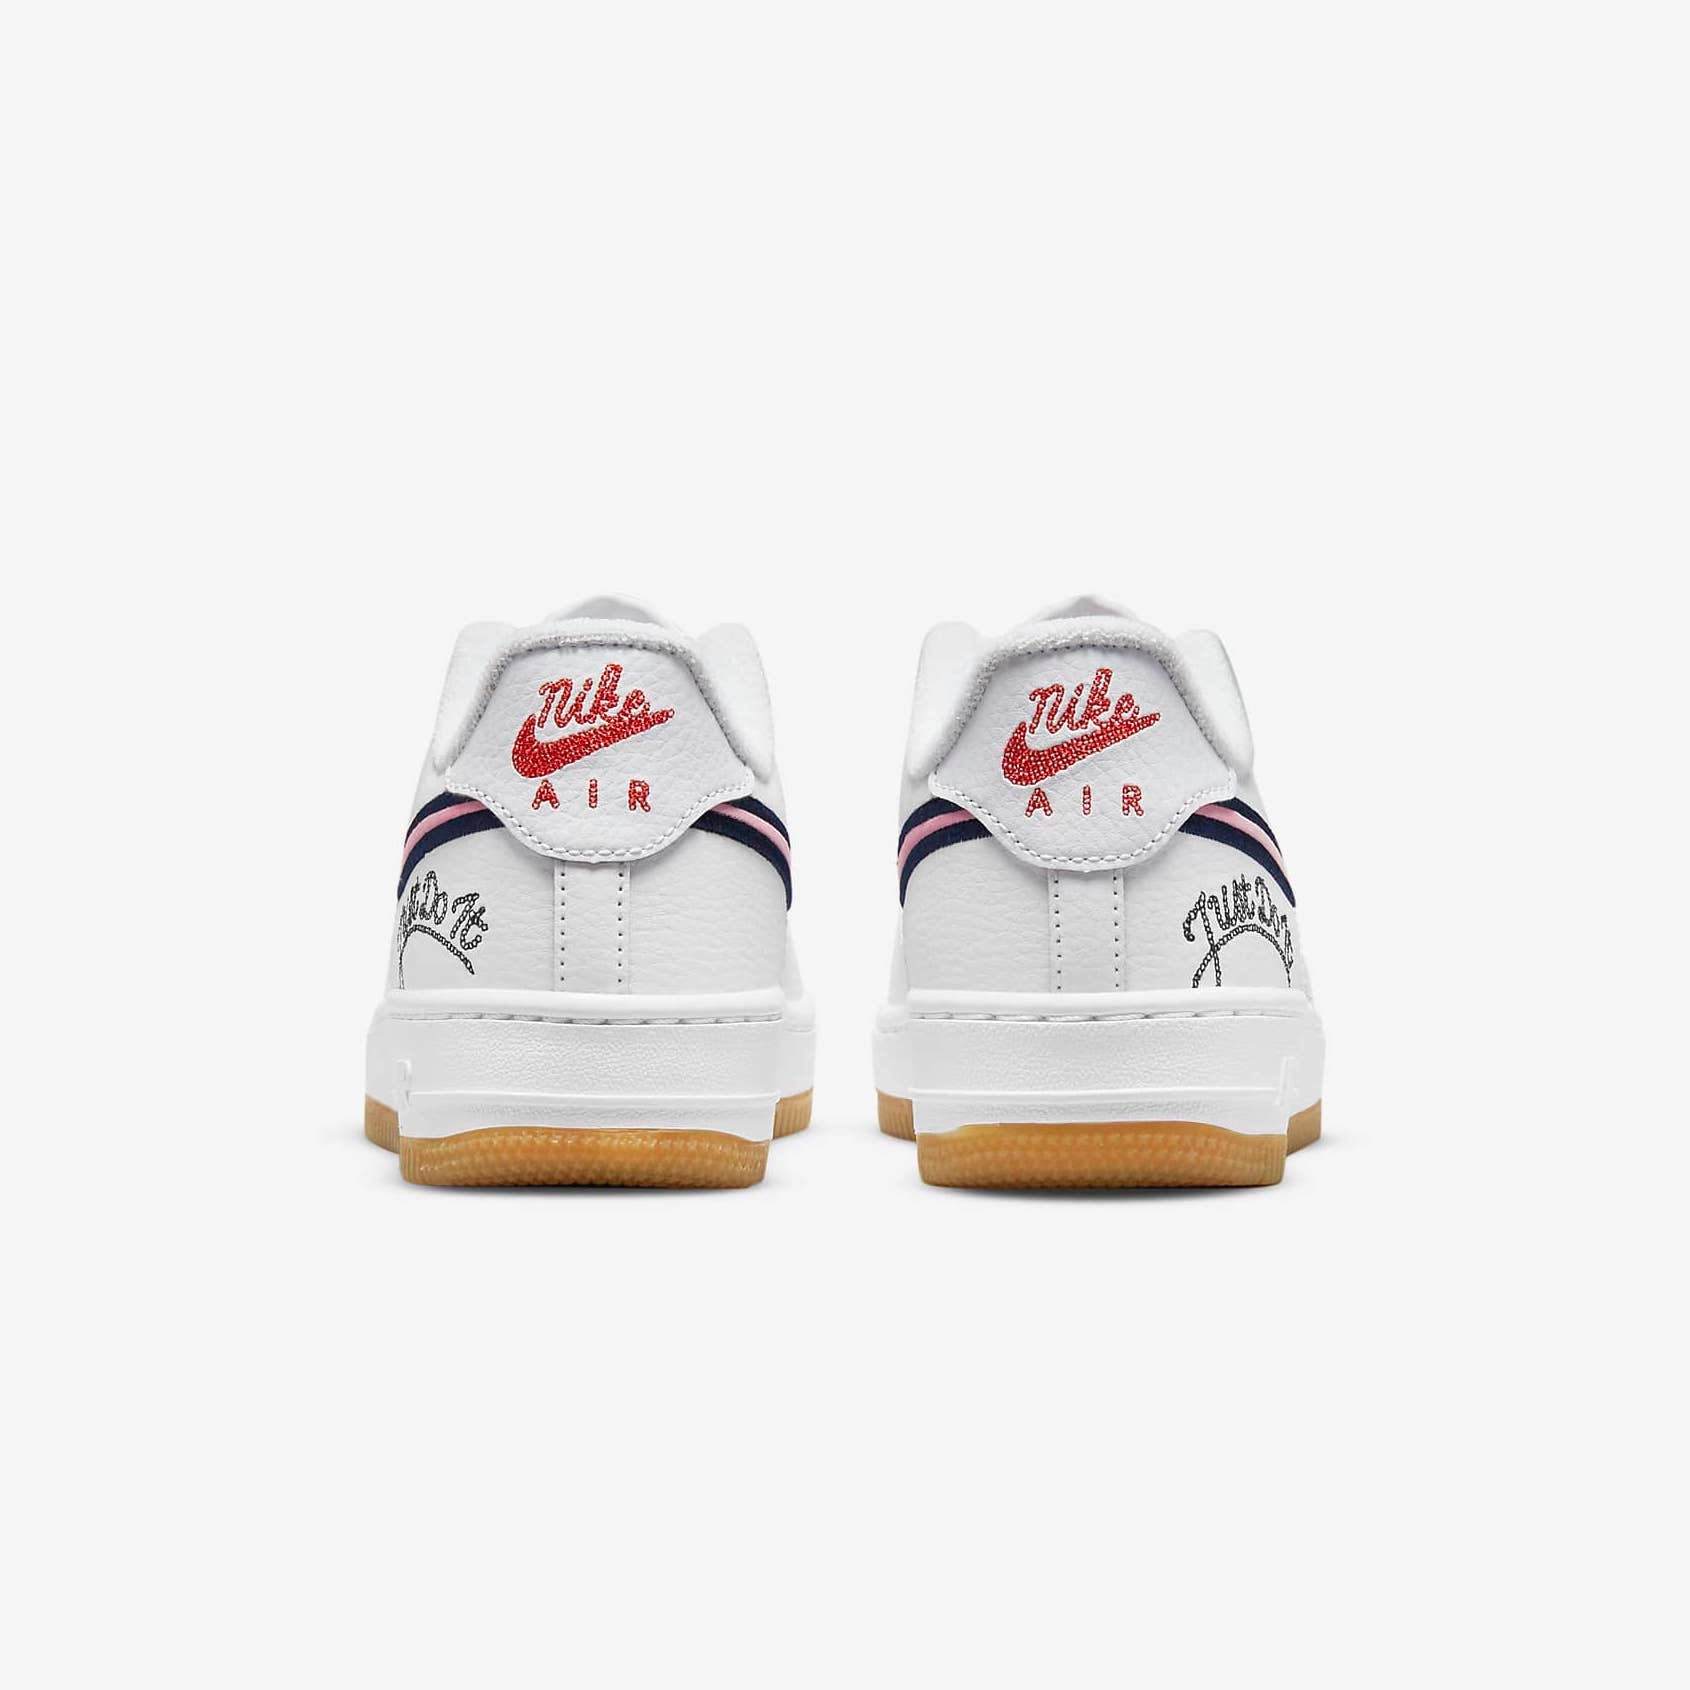 Authenticity Guaranteed - Nike Air Force 1 - nike shoe print and canvas art  supplies store - MissgolfShops